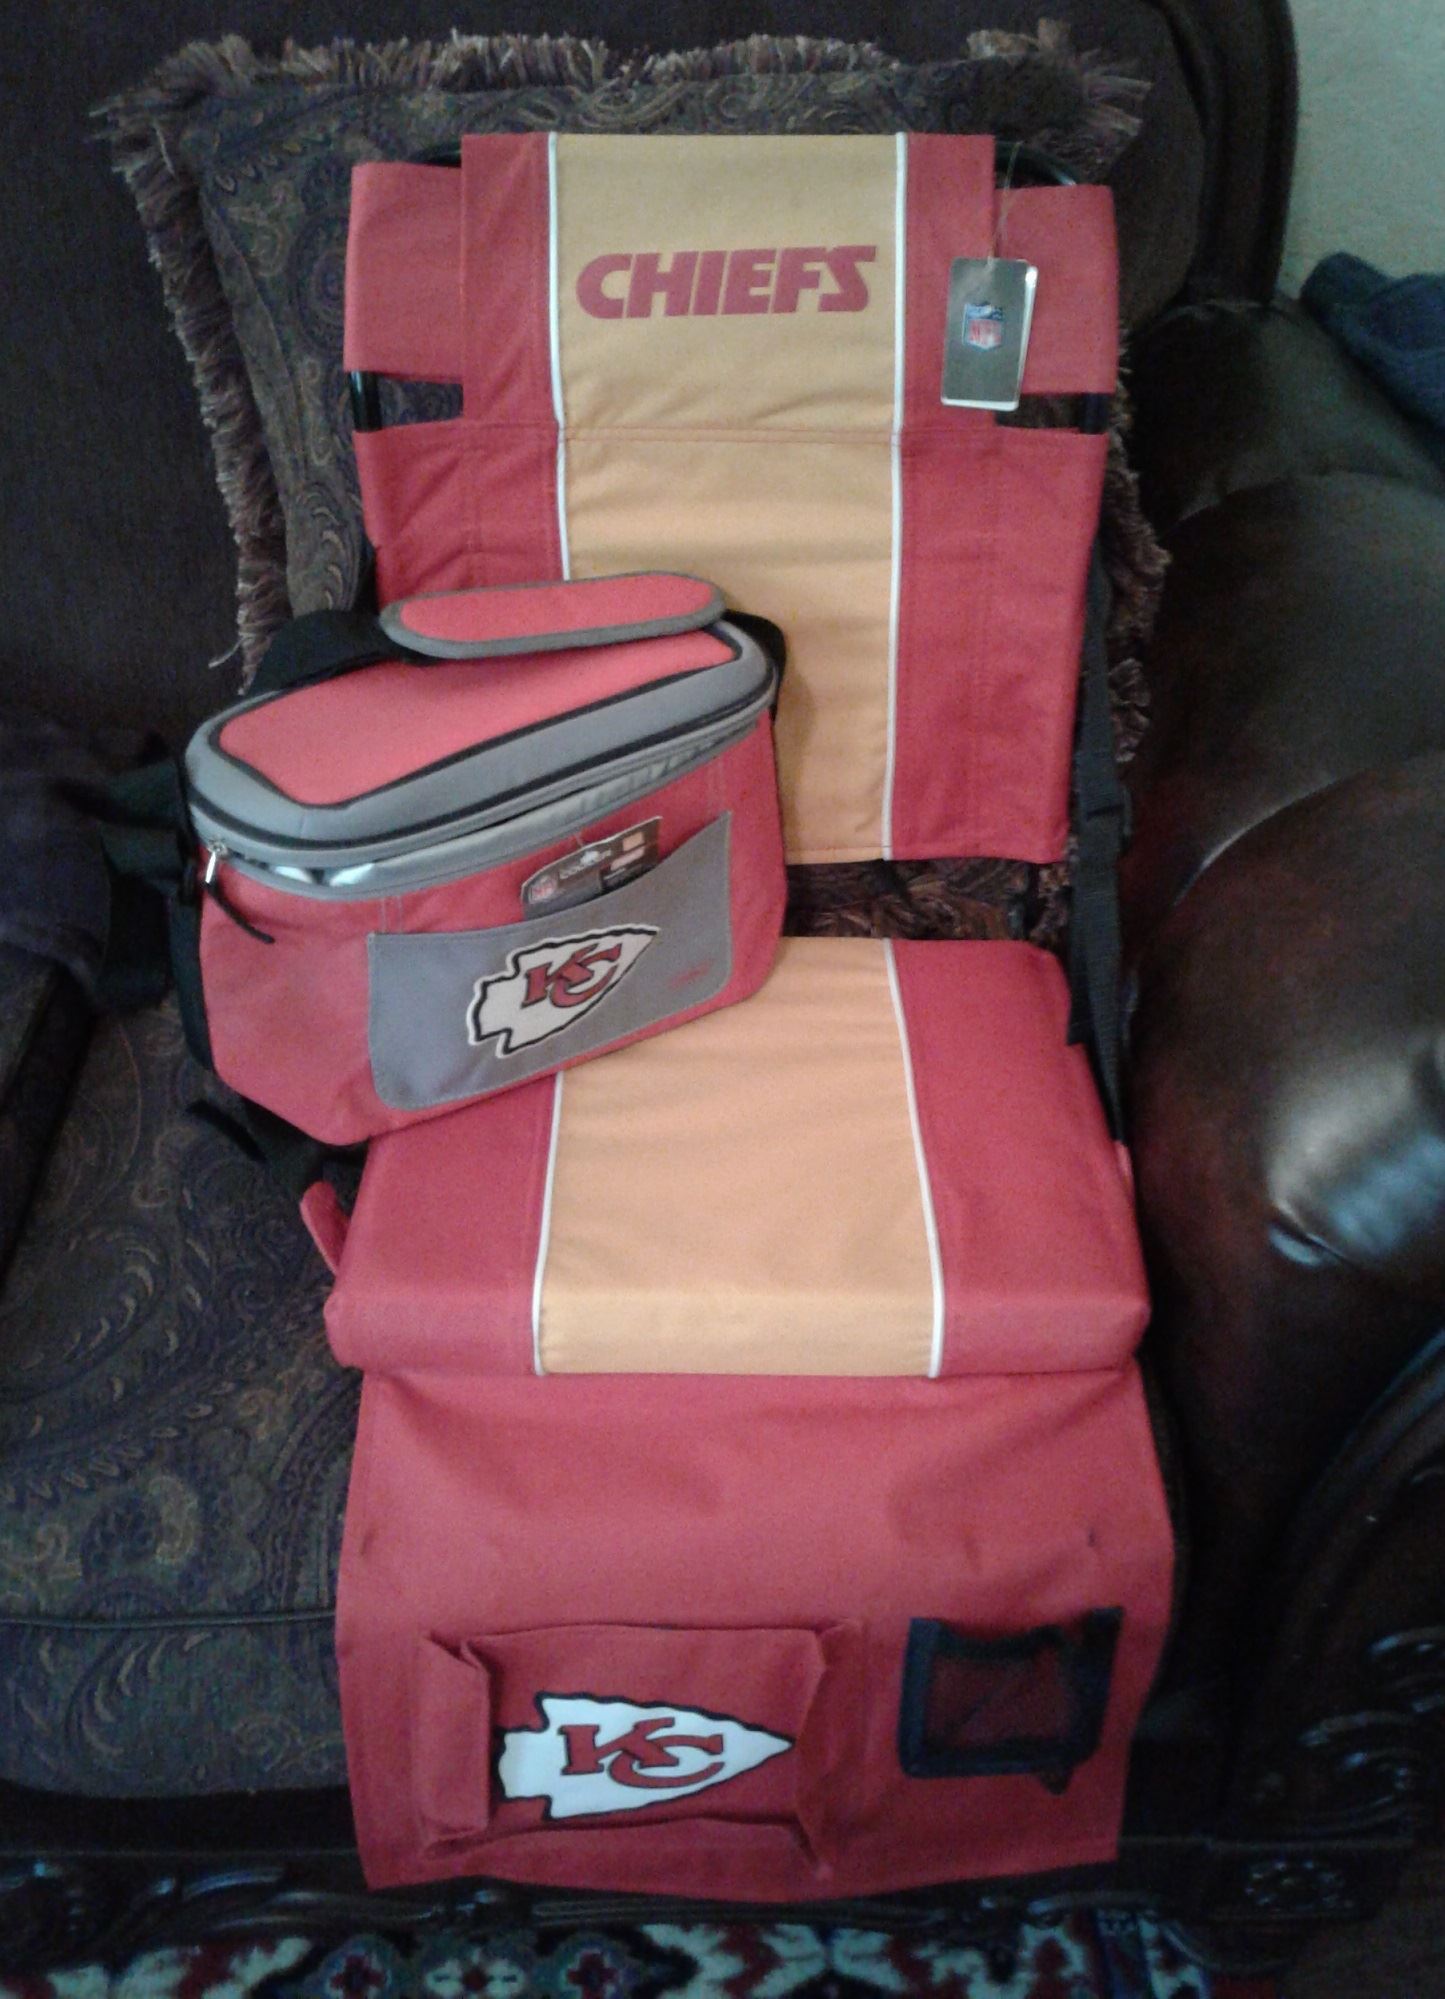 For sale: Chiefs items